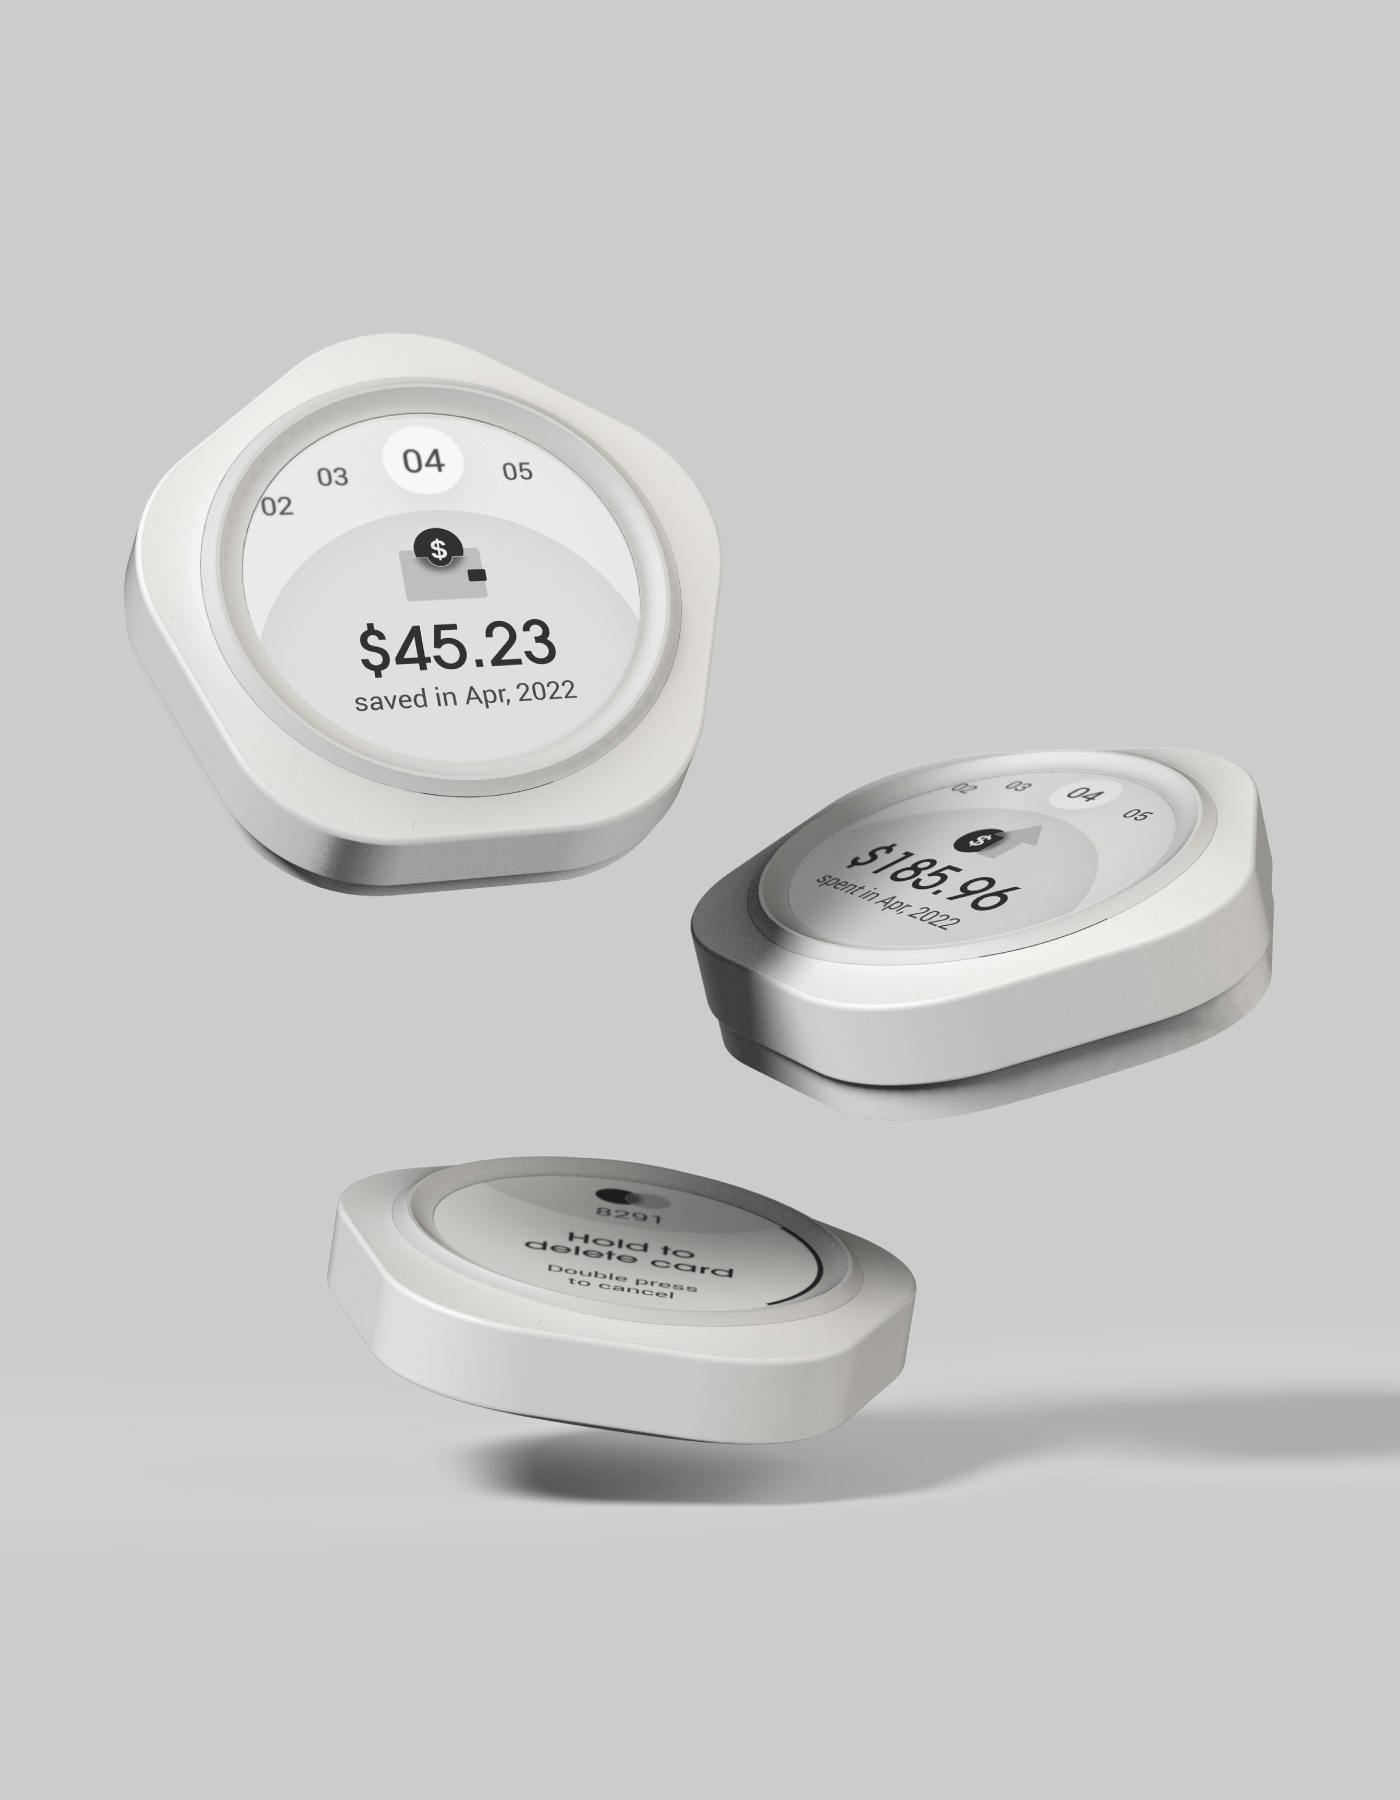 Three Budgetty devices floating in mid-air, each displaying a different interface.